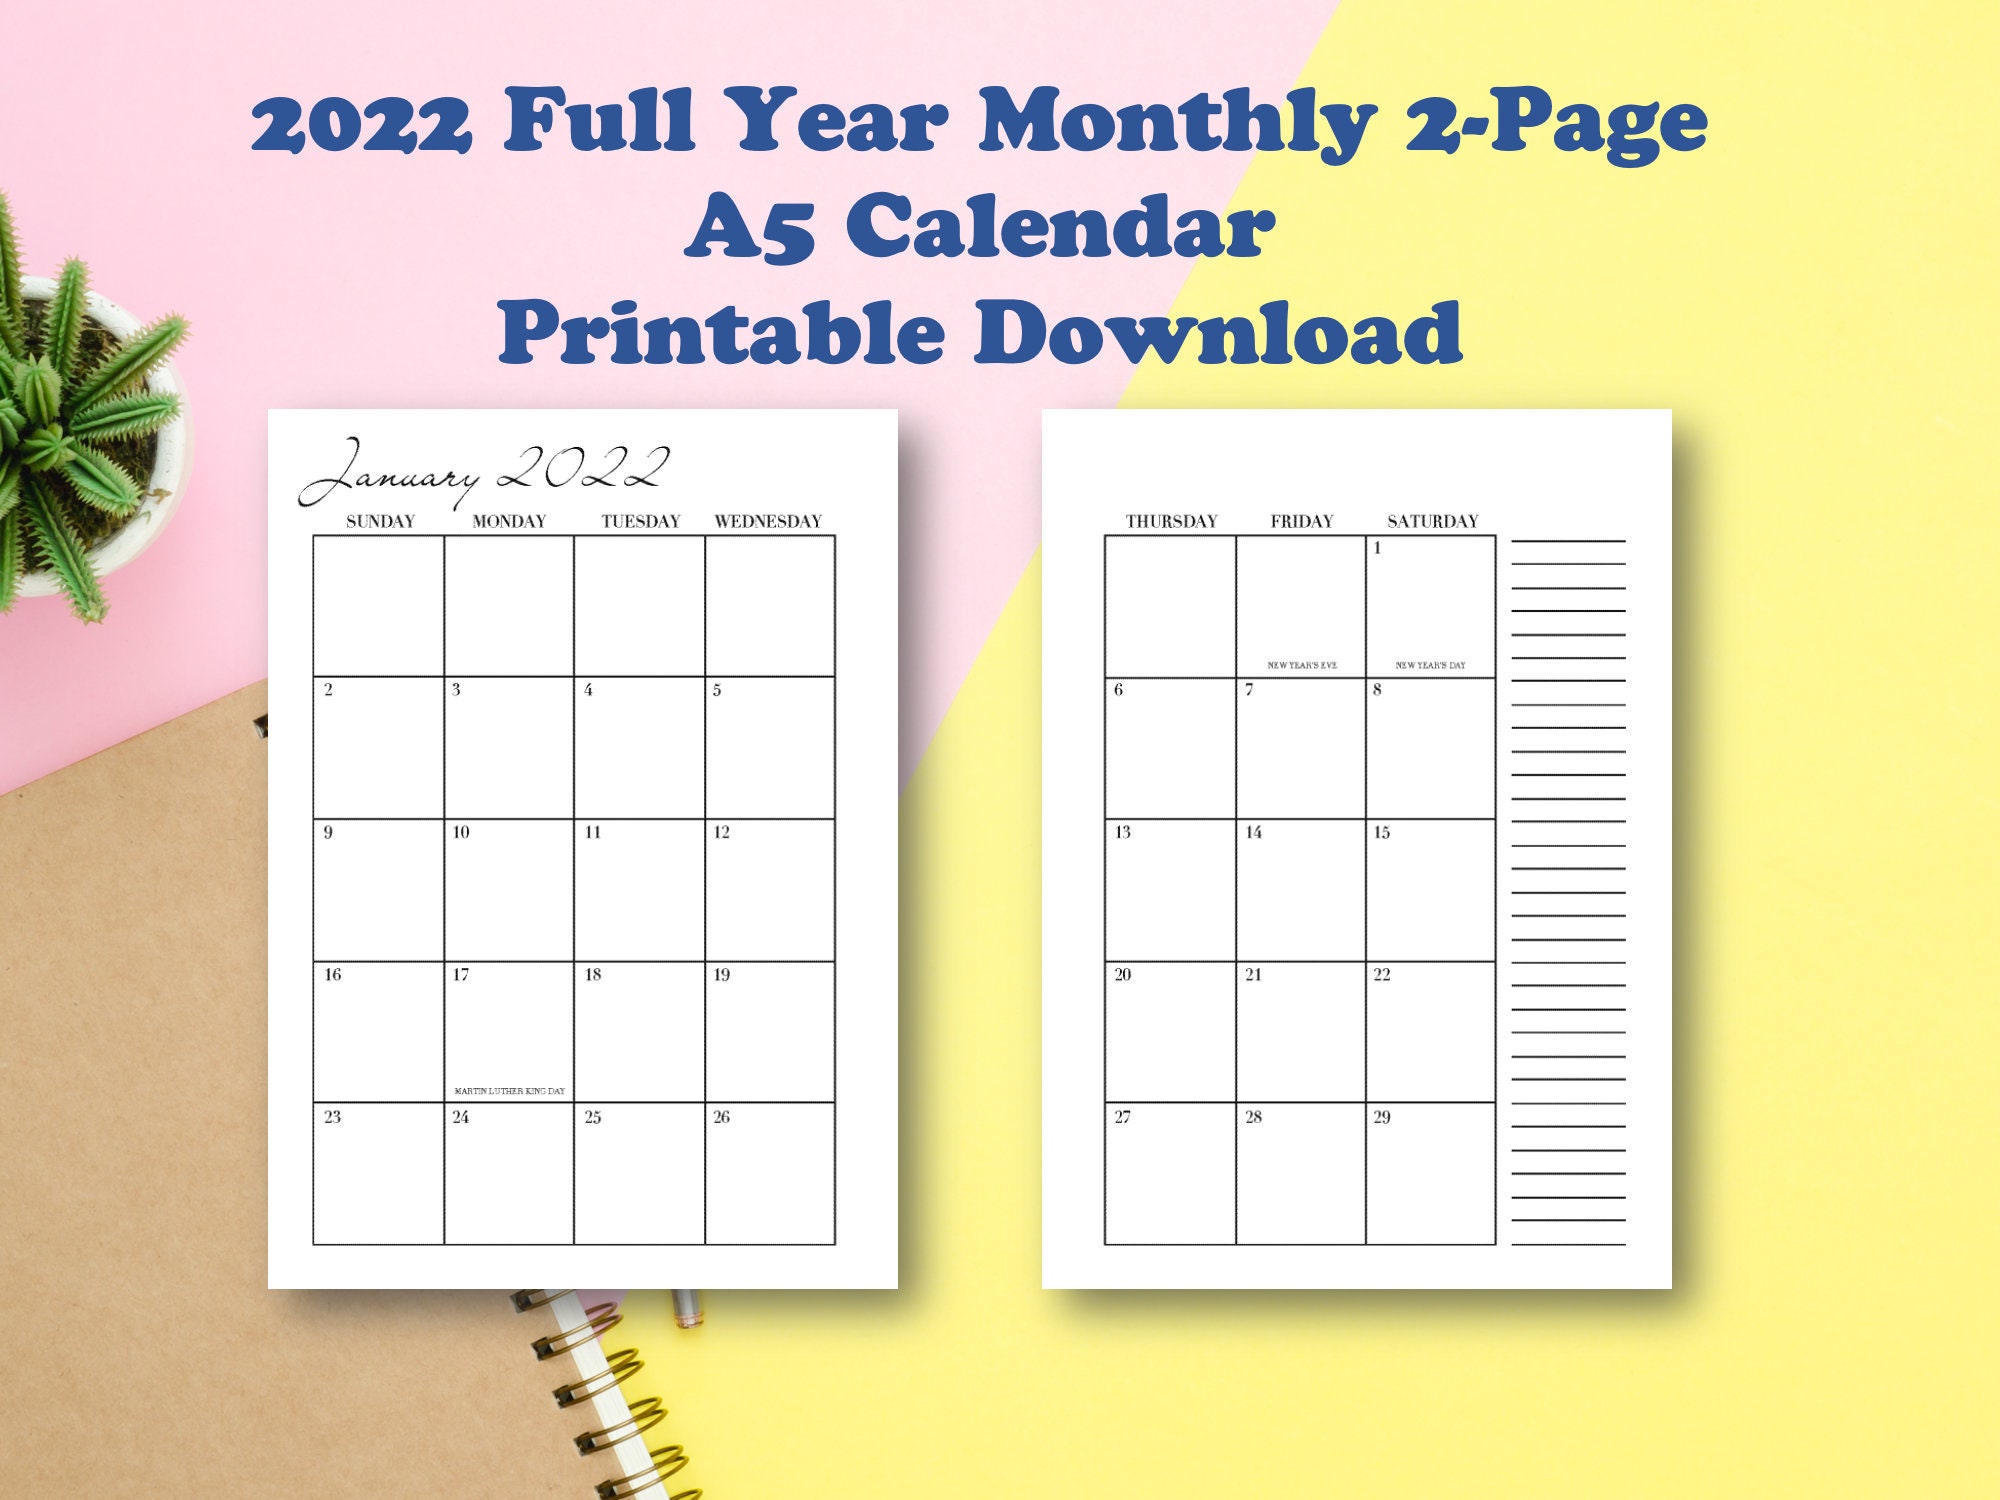 2022-full-year-monthly-2-page-a5-calendar-printable-download-etsy